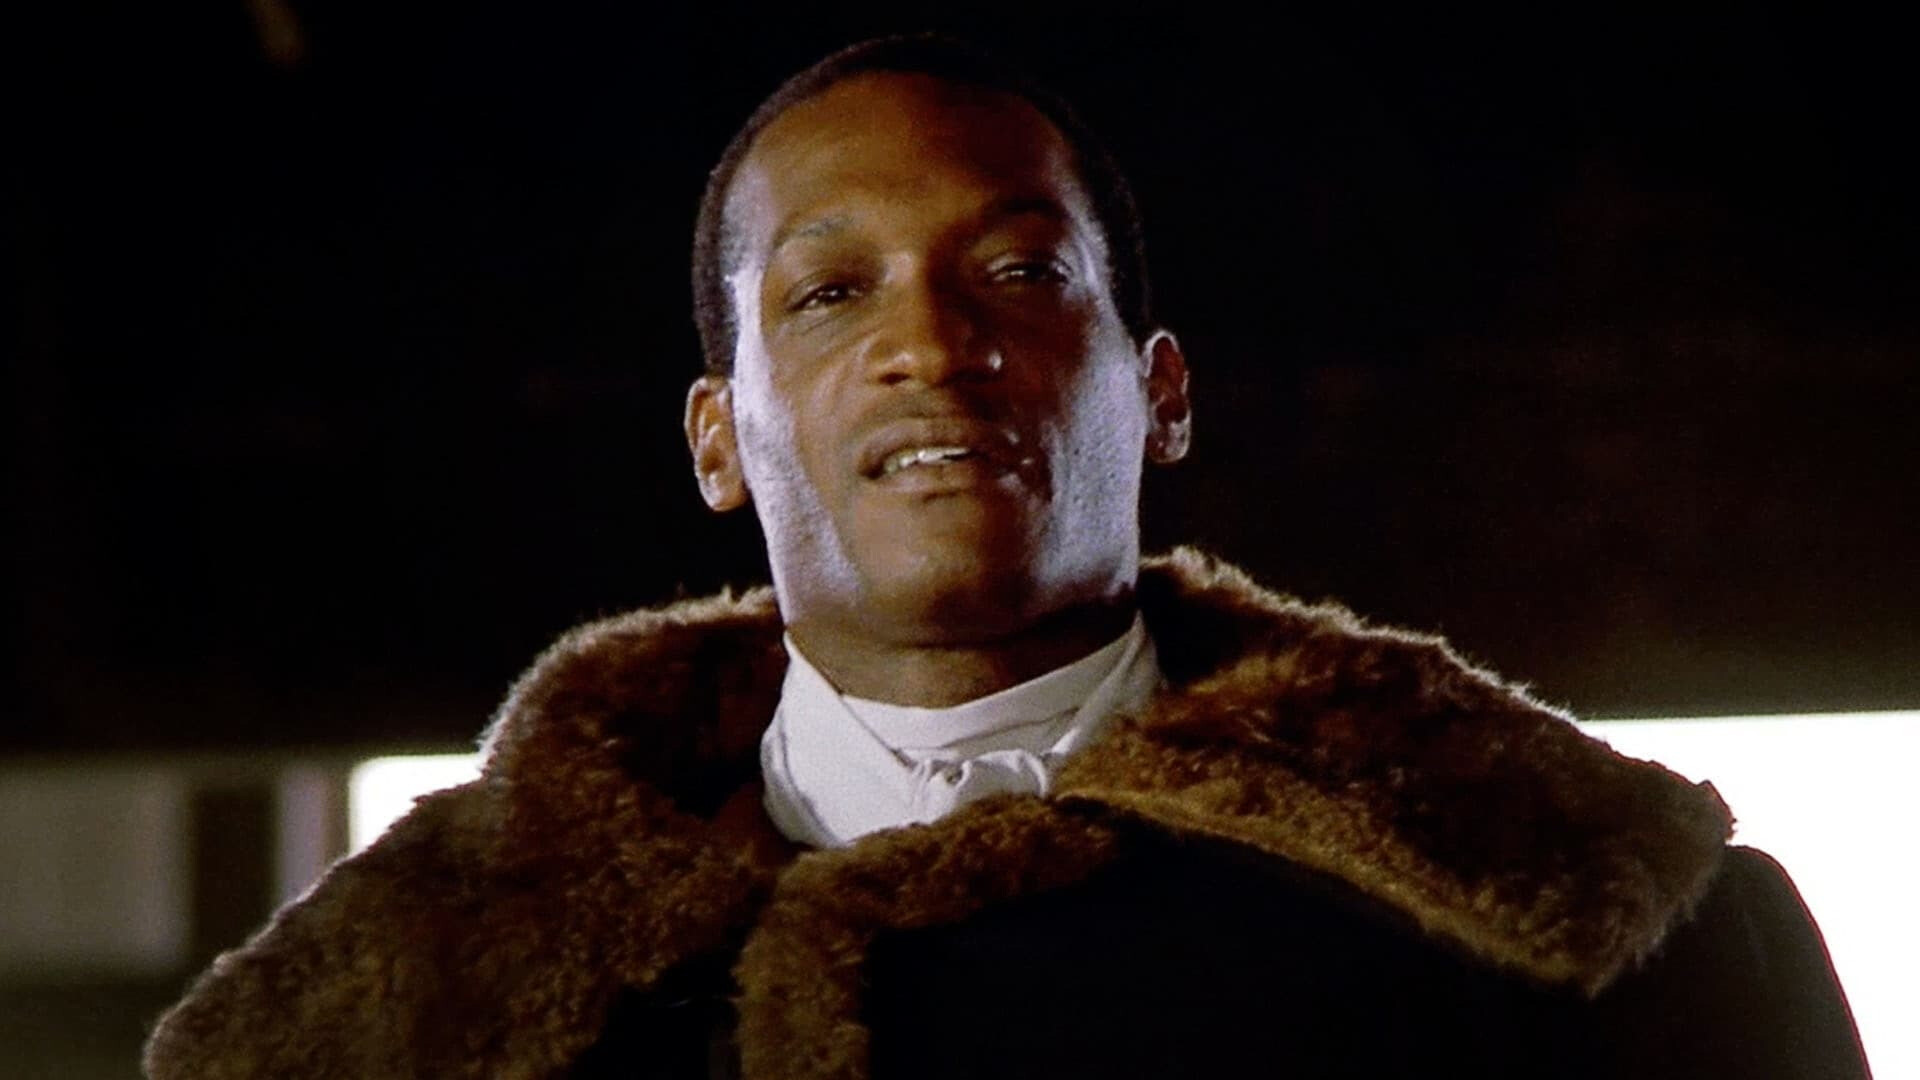 Tony Todd from Candyman was Worf's Brother